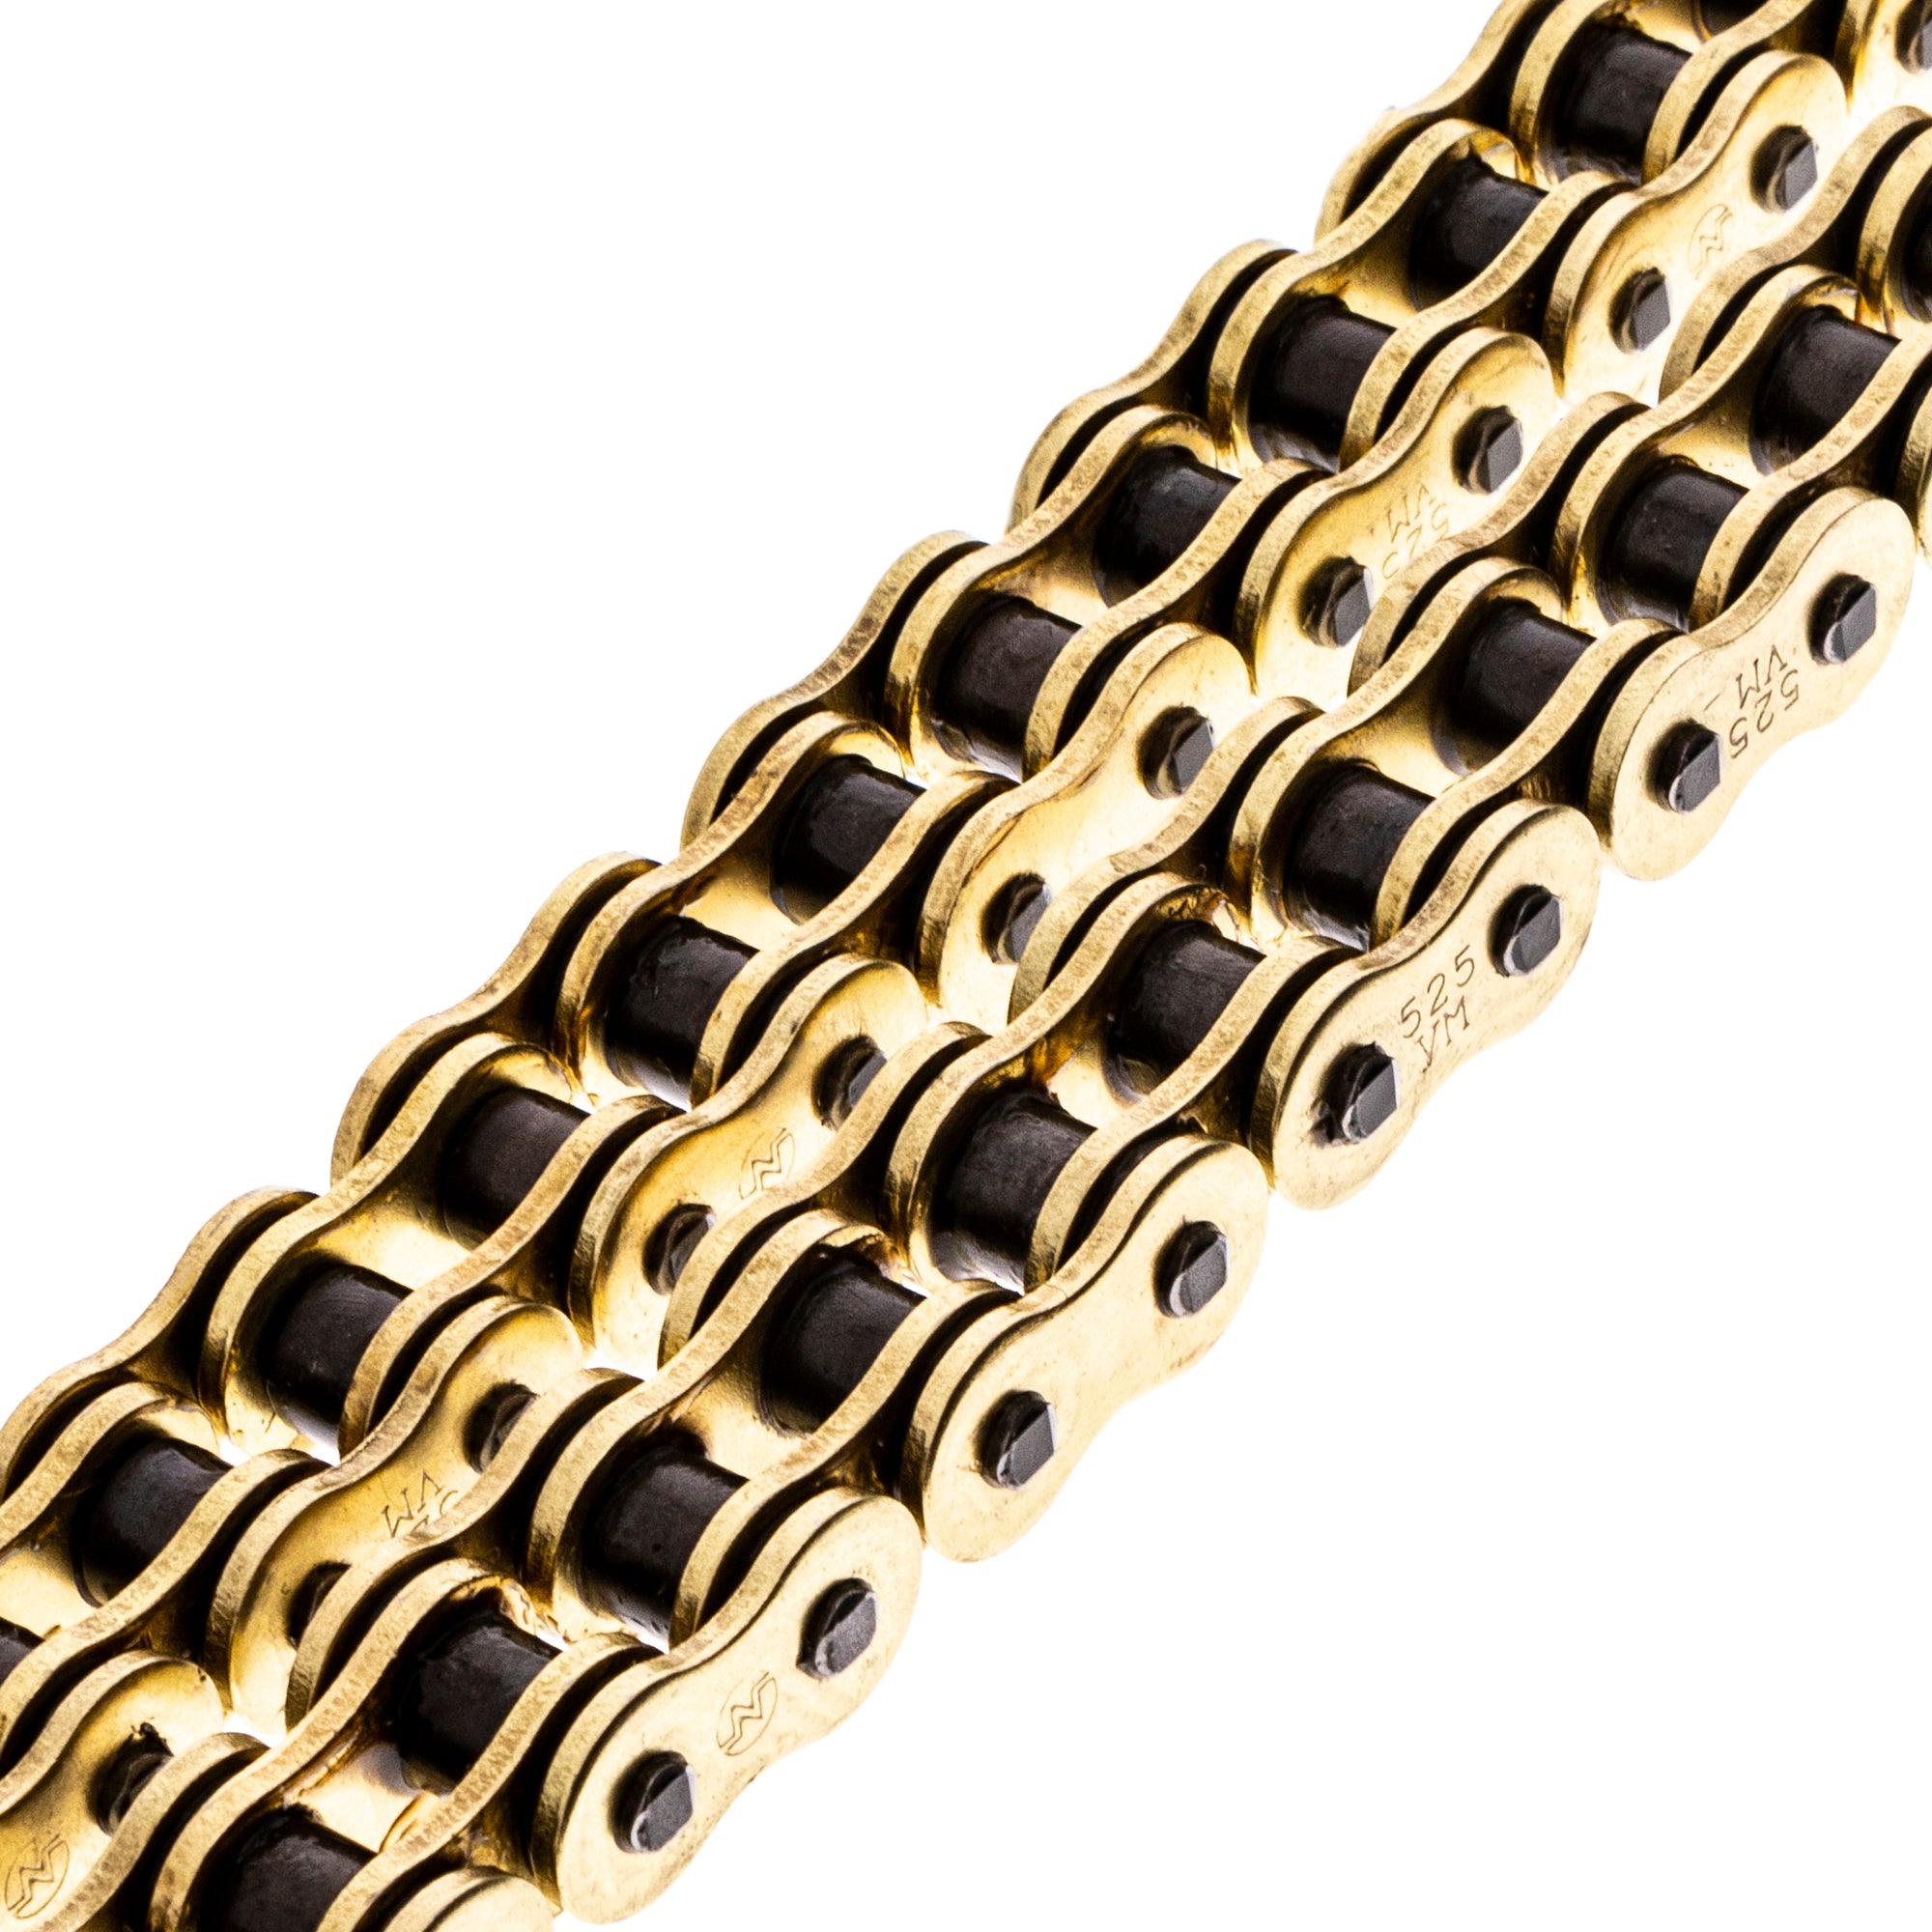 Gold X-Ring Chain 128 w/ Master Link for zOTHER 5530 NICHE 519-CDC2631H